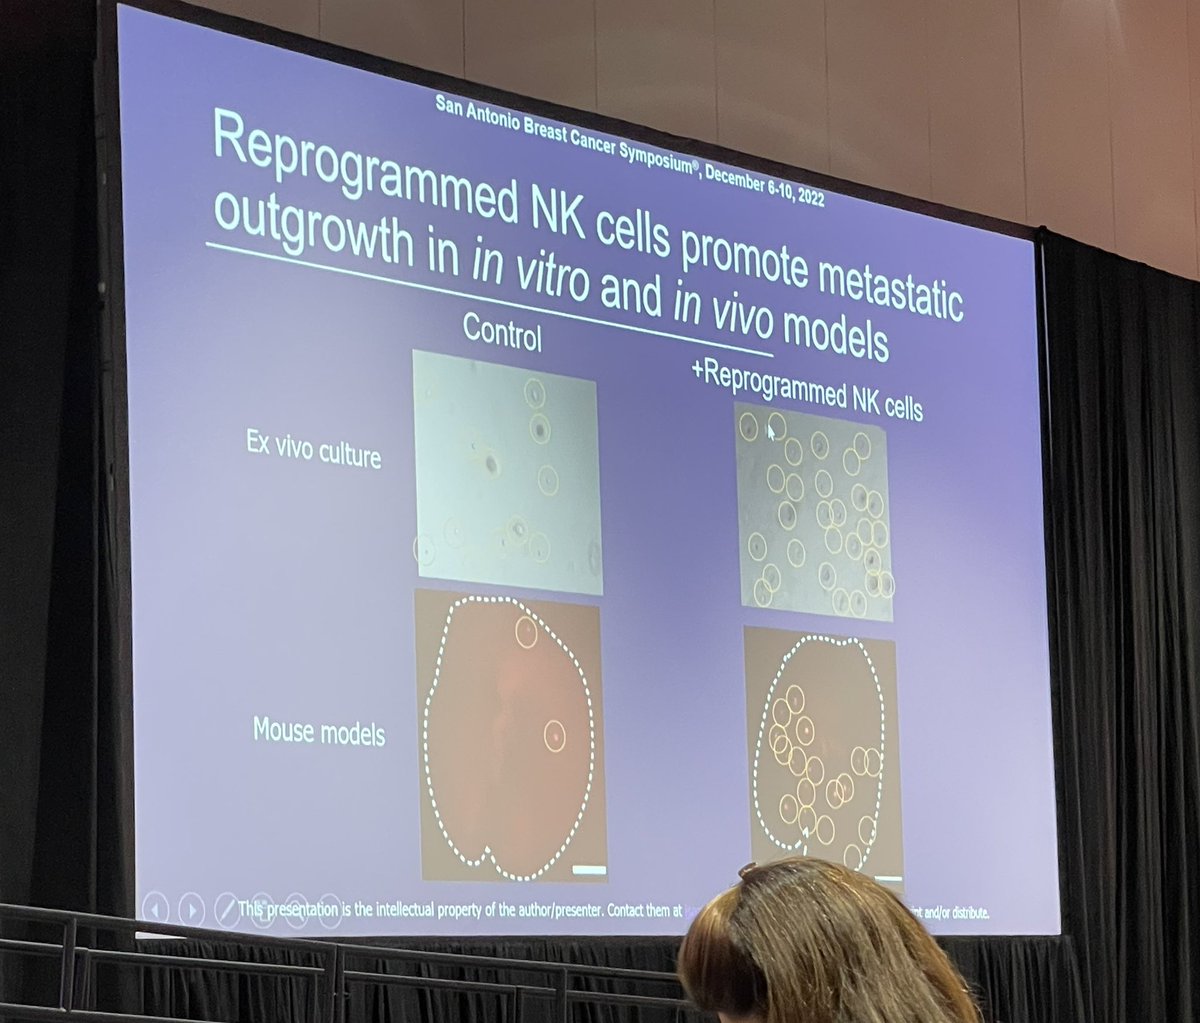 Exciting talk by @ithinkichan from @utswcancer on NK cells and dormancy as well as suppressive role of tumor reprogrammed NK cells at #SABCS22!